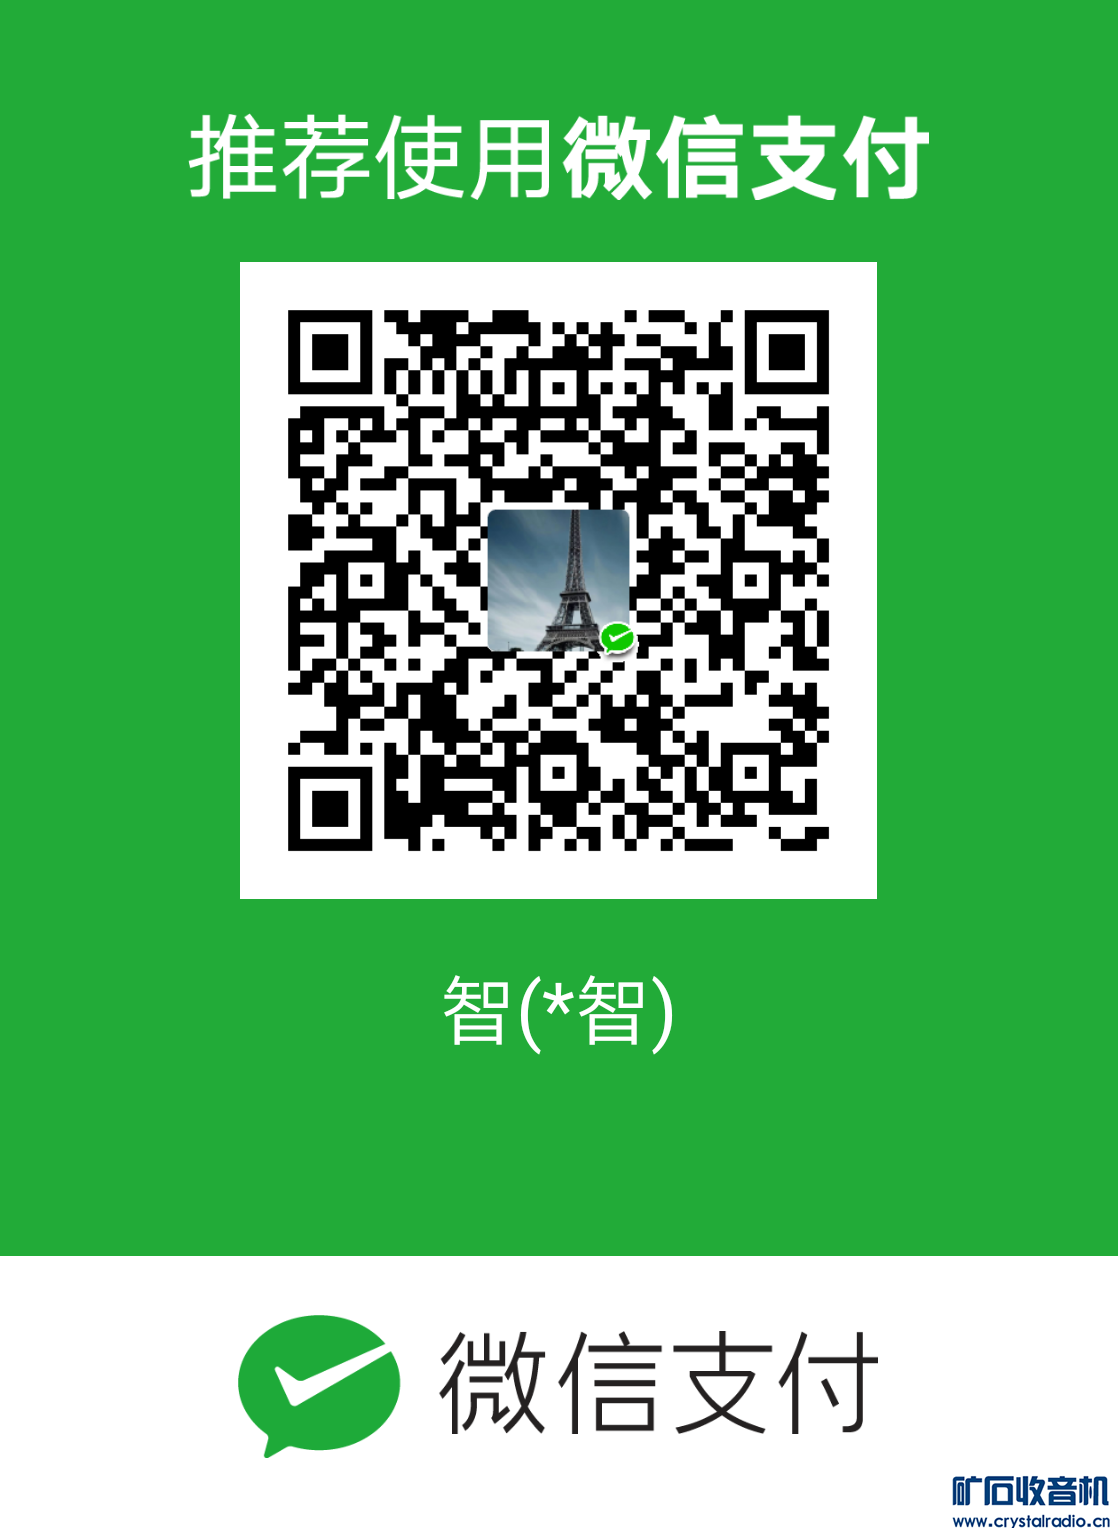 mm_facetoface_collect_qrcode_1678677852552.png